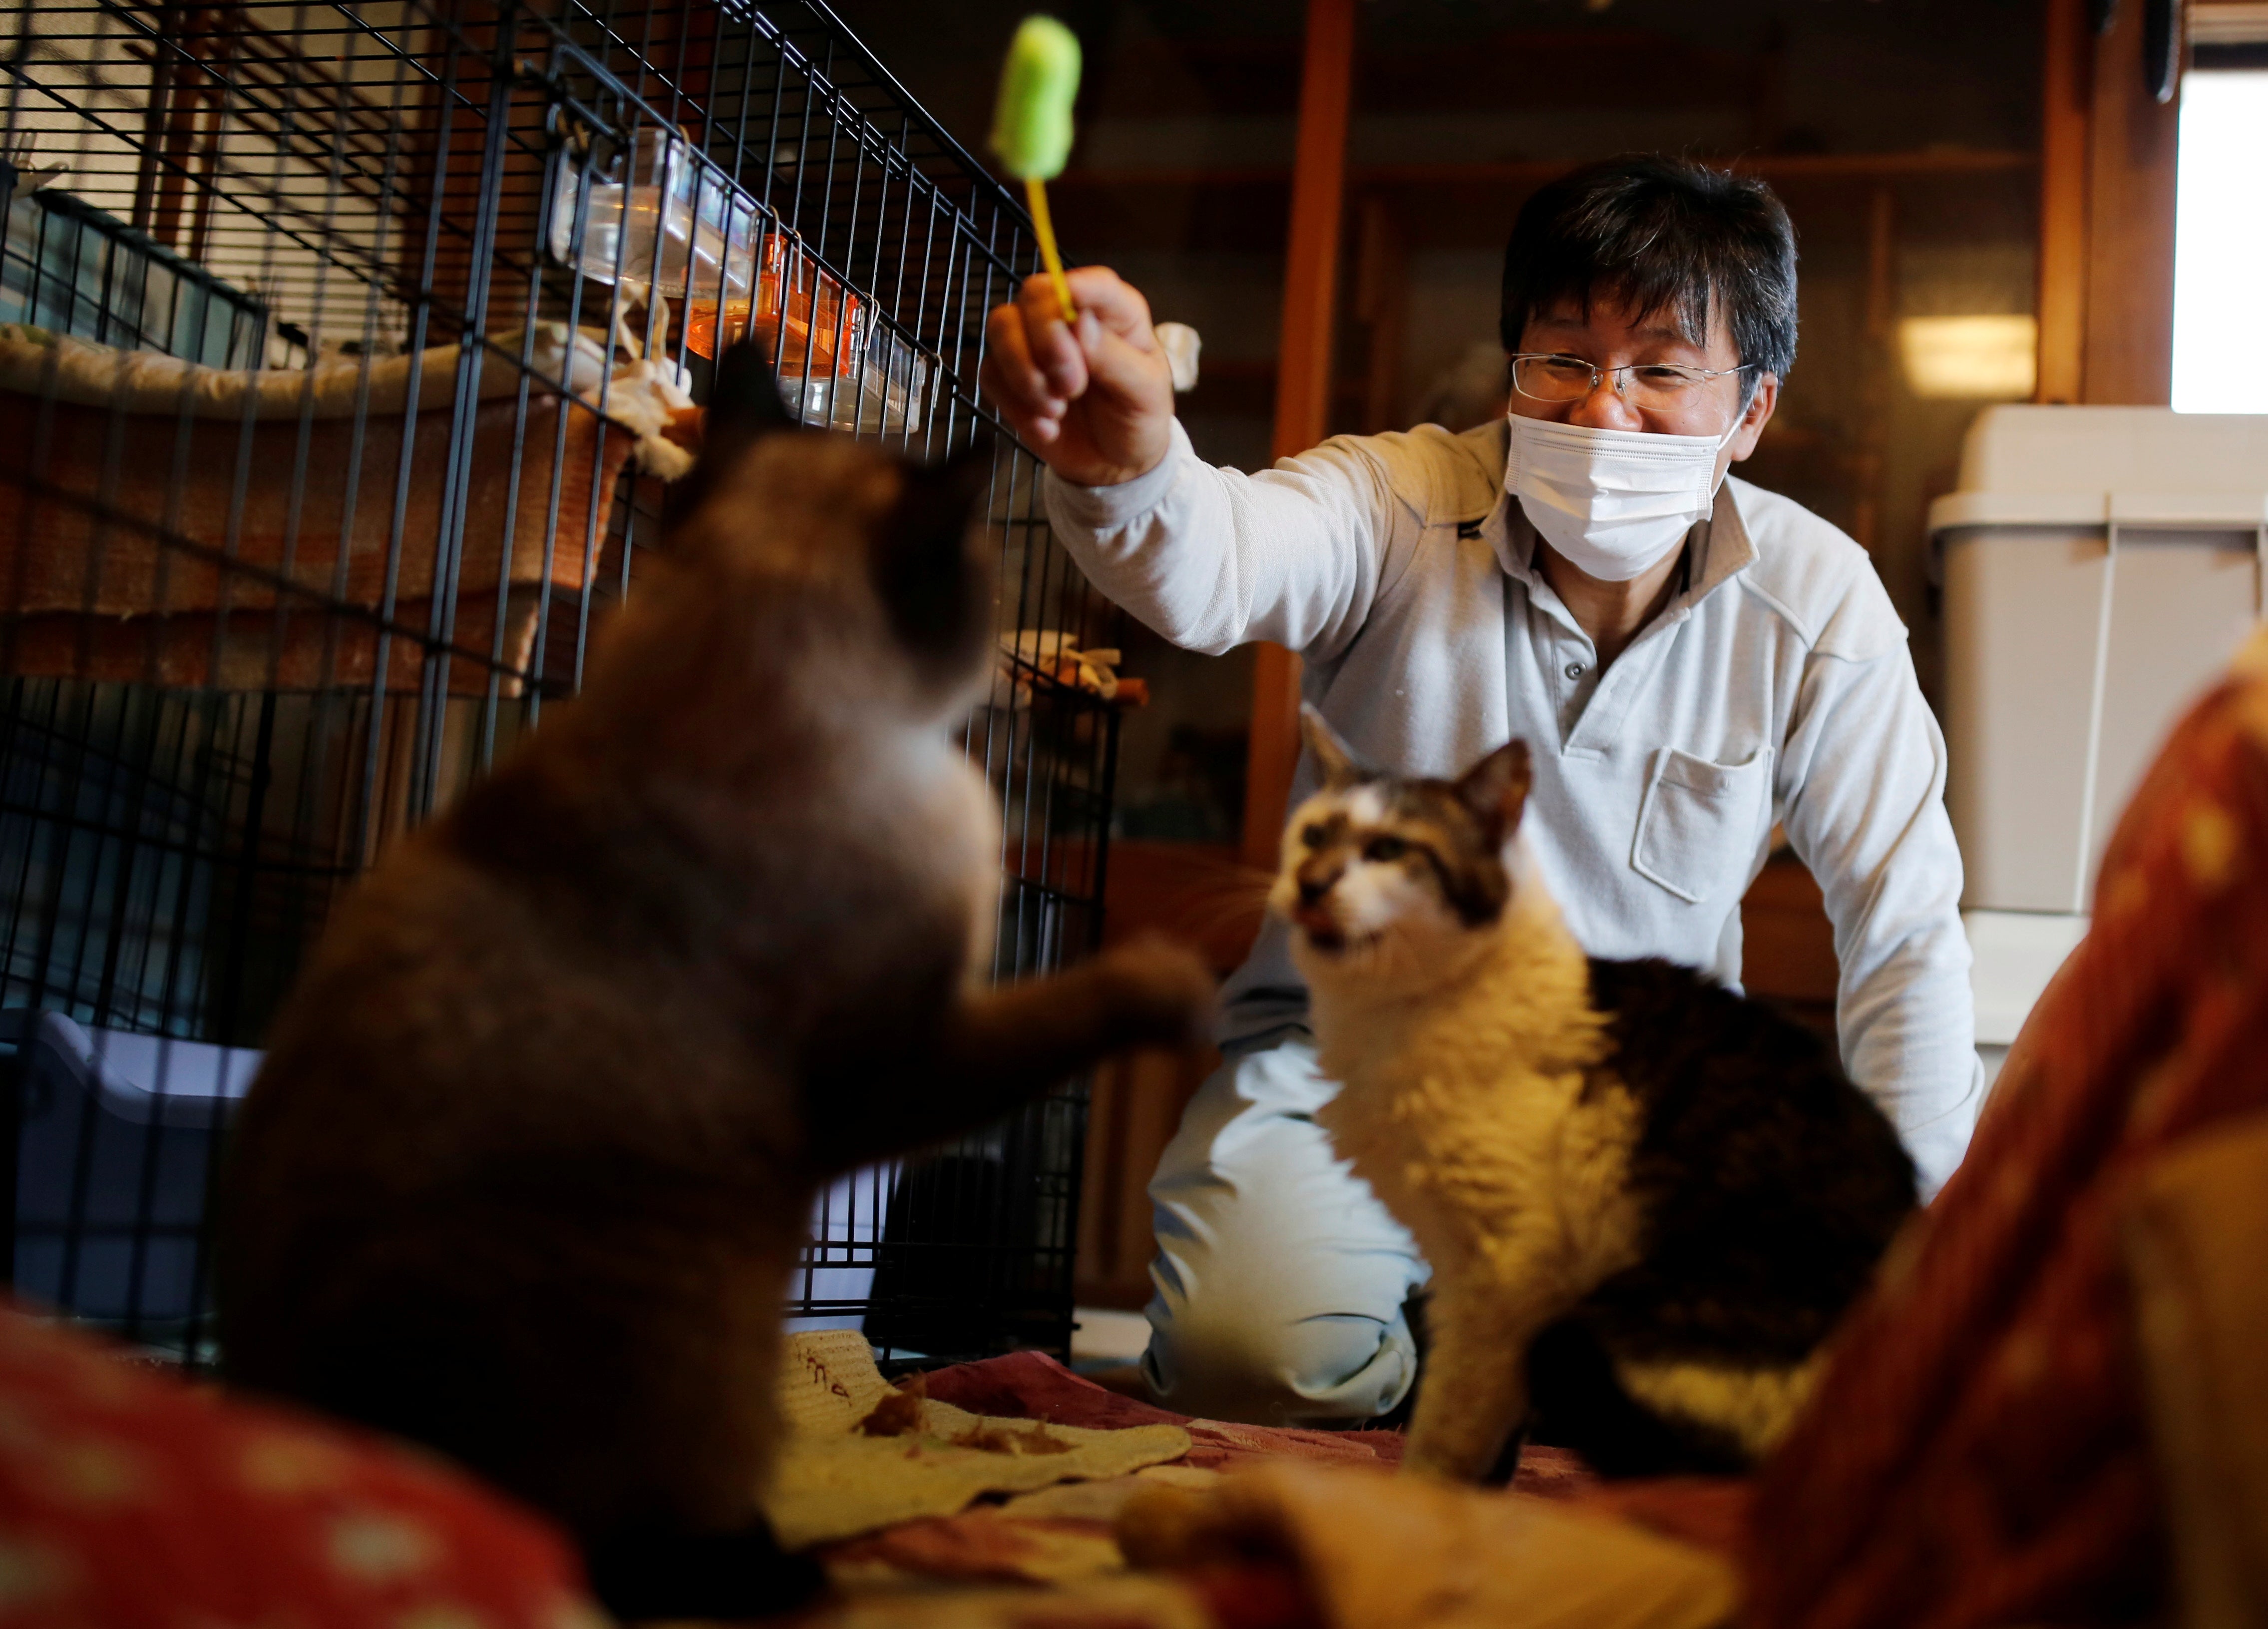 Sakae Kato plays with cats that he rescued, called Mokkun and Charm, who are both infected with feline leukemia virus, at his home, in a restricted zone in Namie, Fukushima Prefecture, Japan